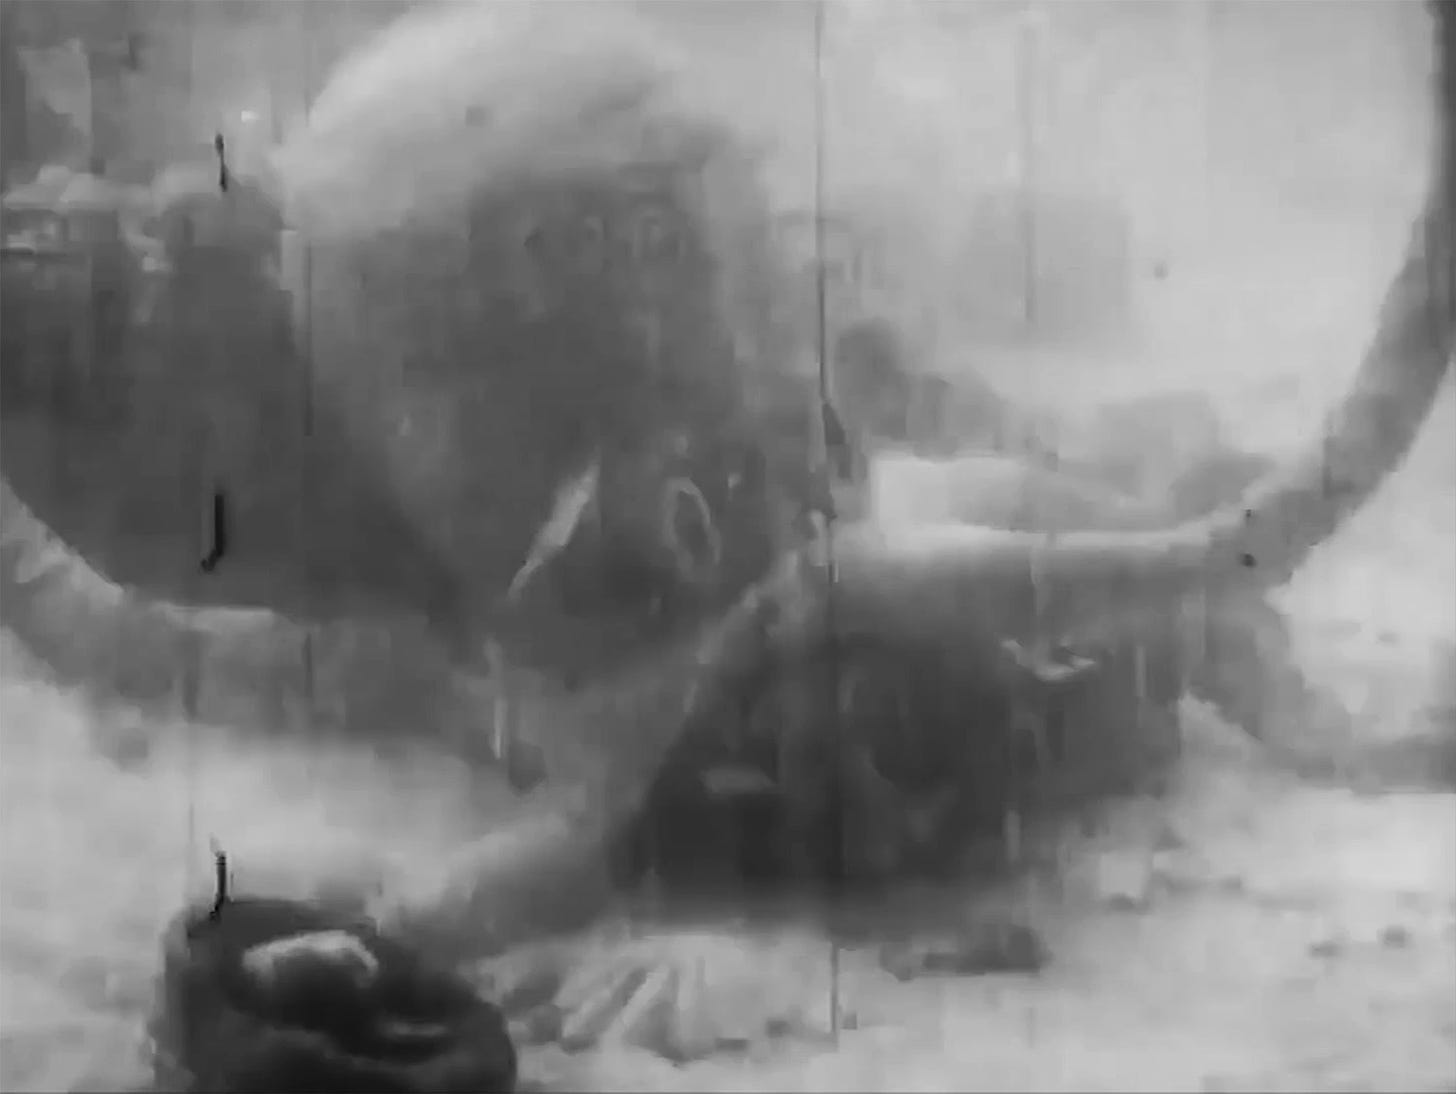 A hilarious fake octopus from the 1916 film version of 20,000 Leagues Under the Sea